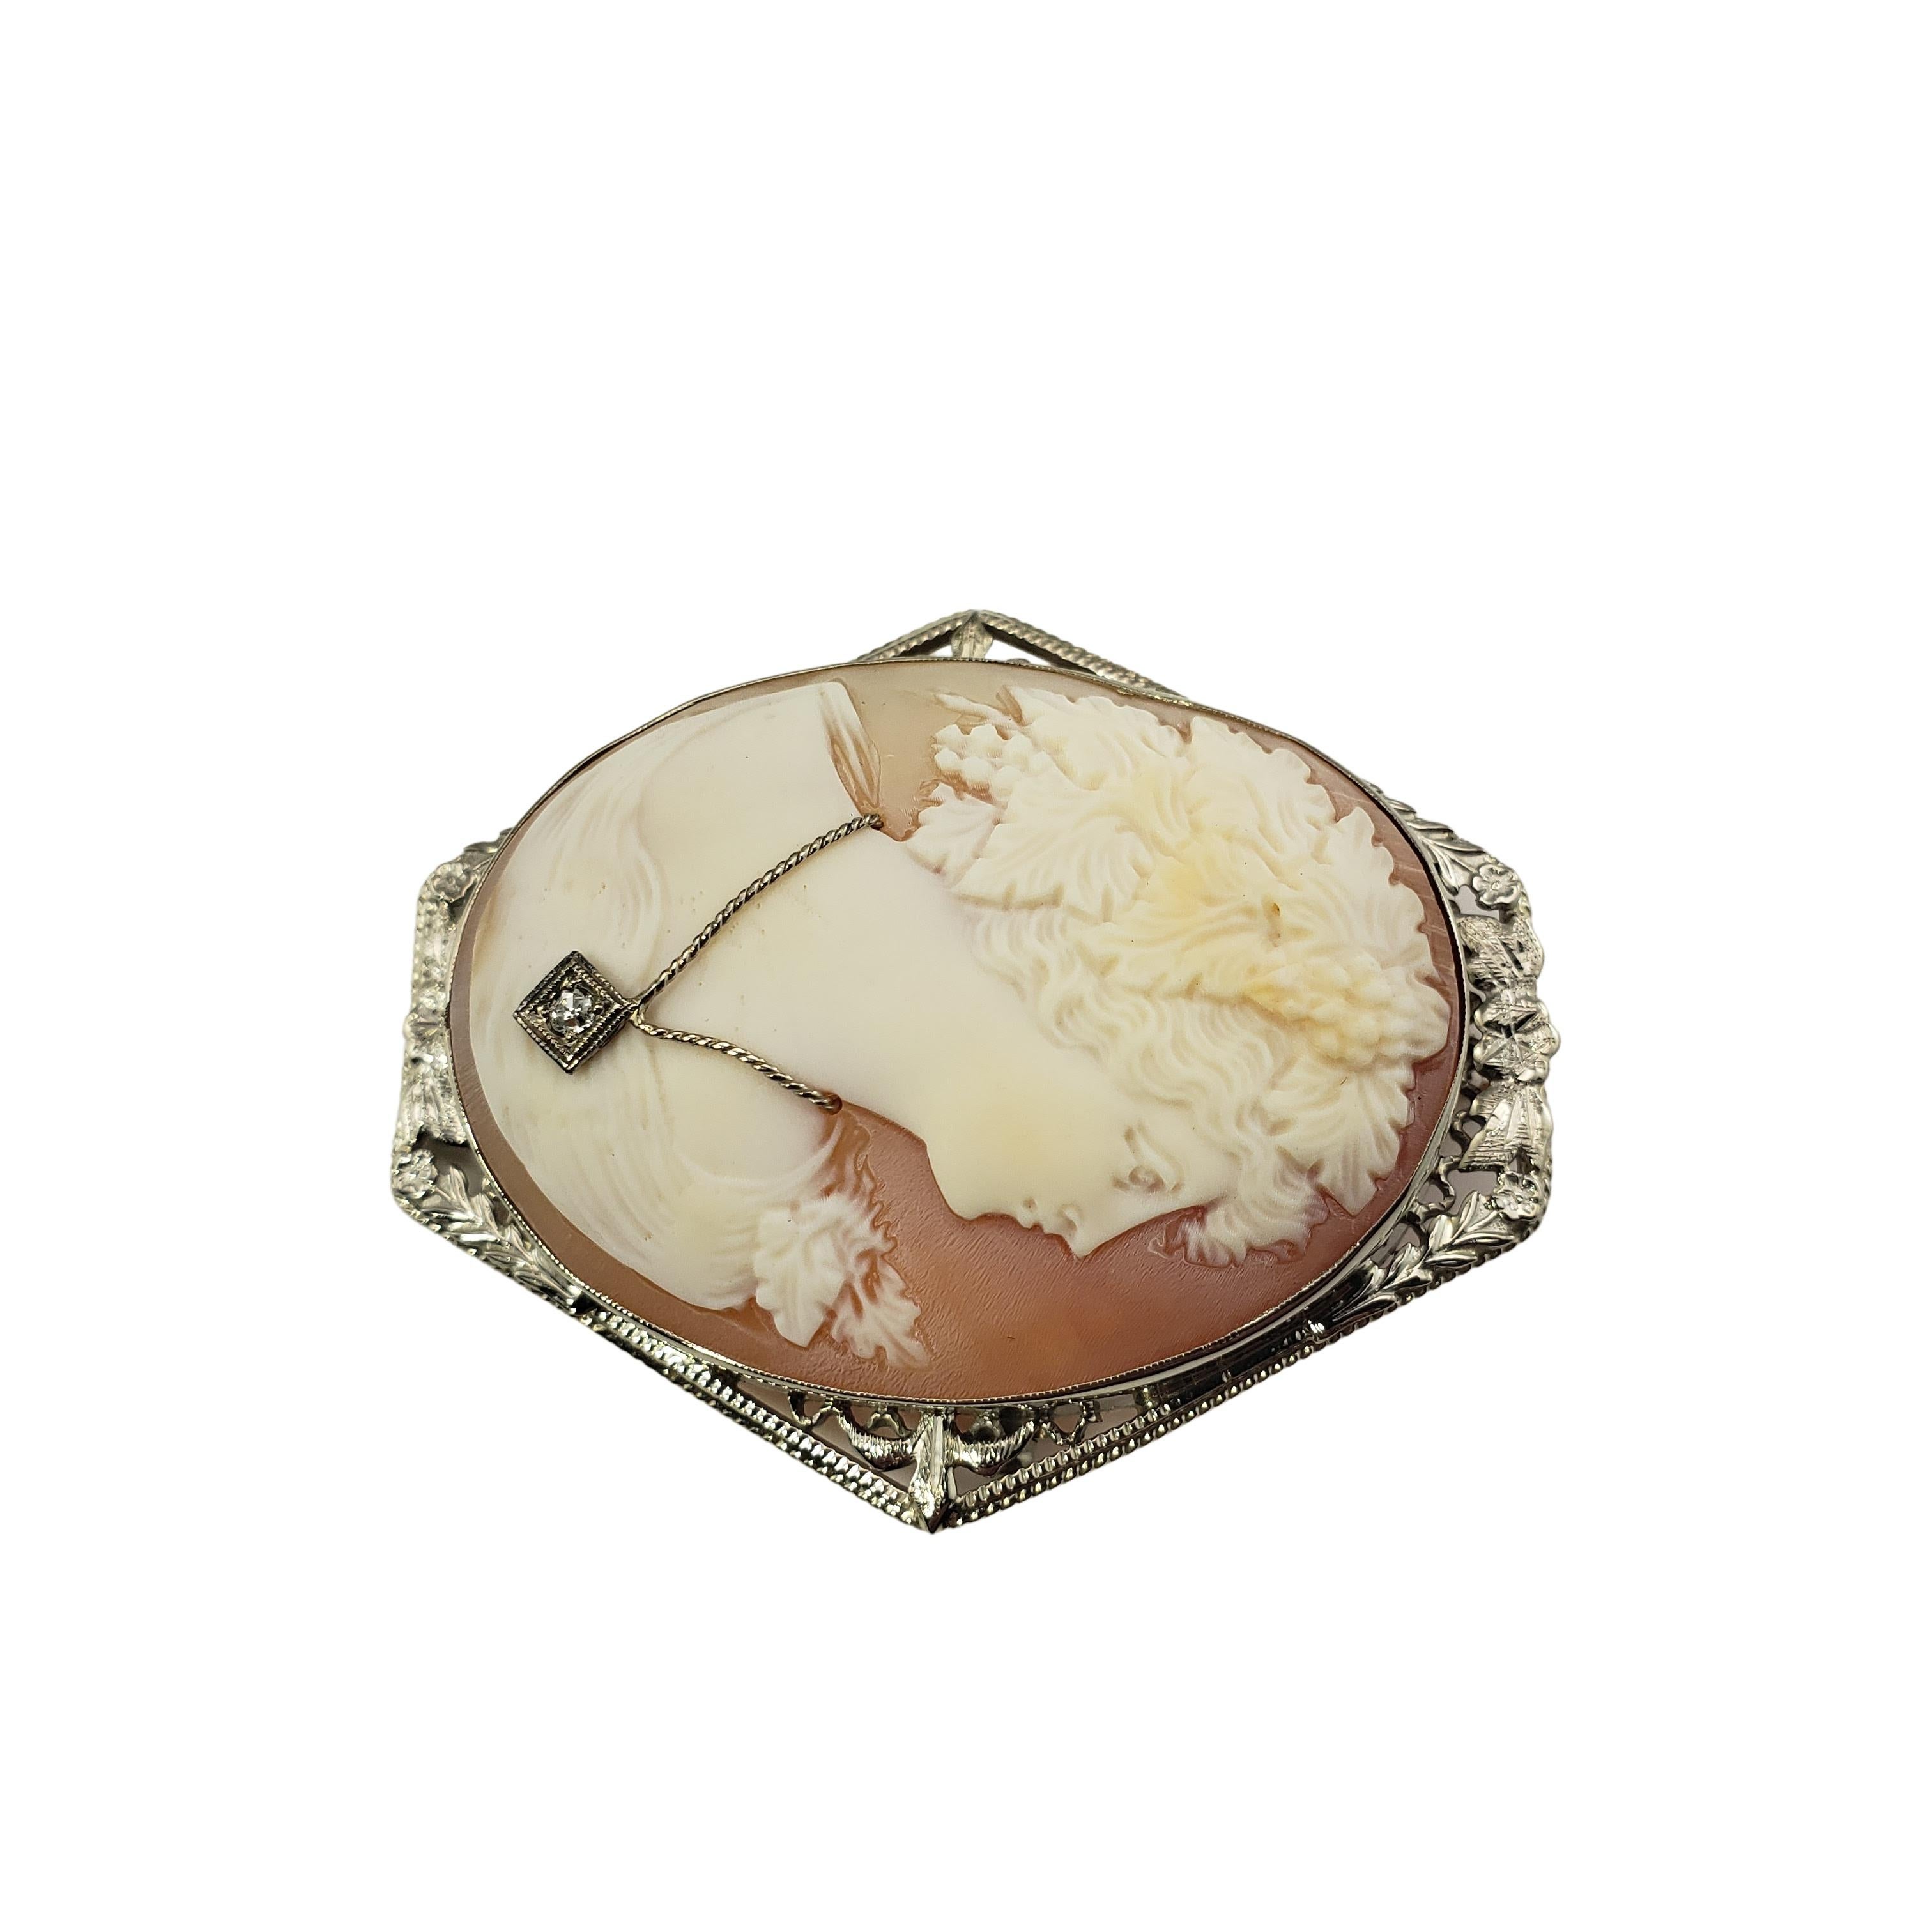 14 Karat White Gold and Diamond Cameo Brooch/Pendant For Sale 3